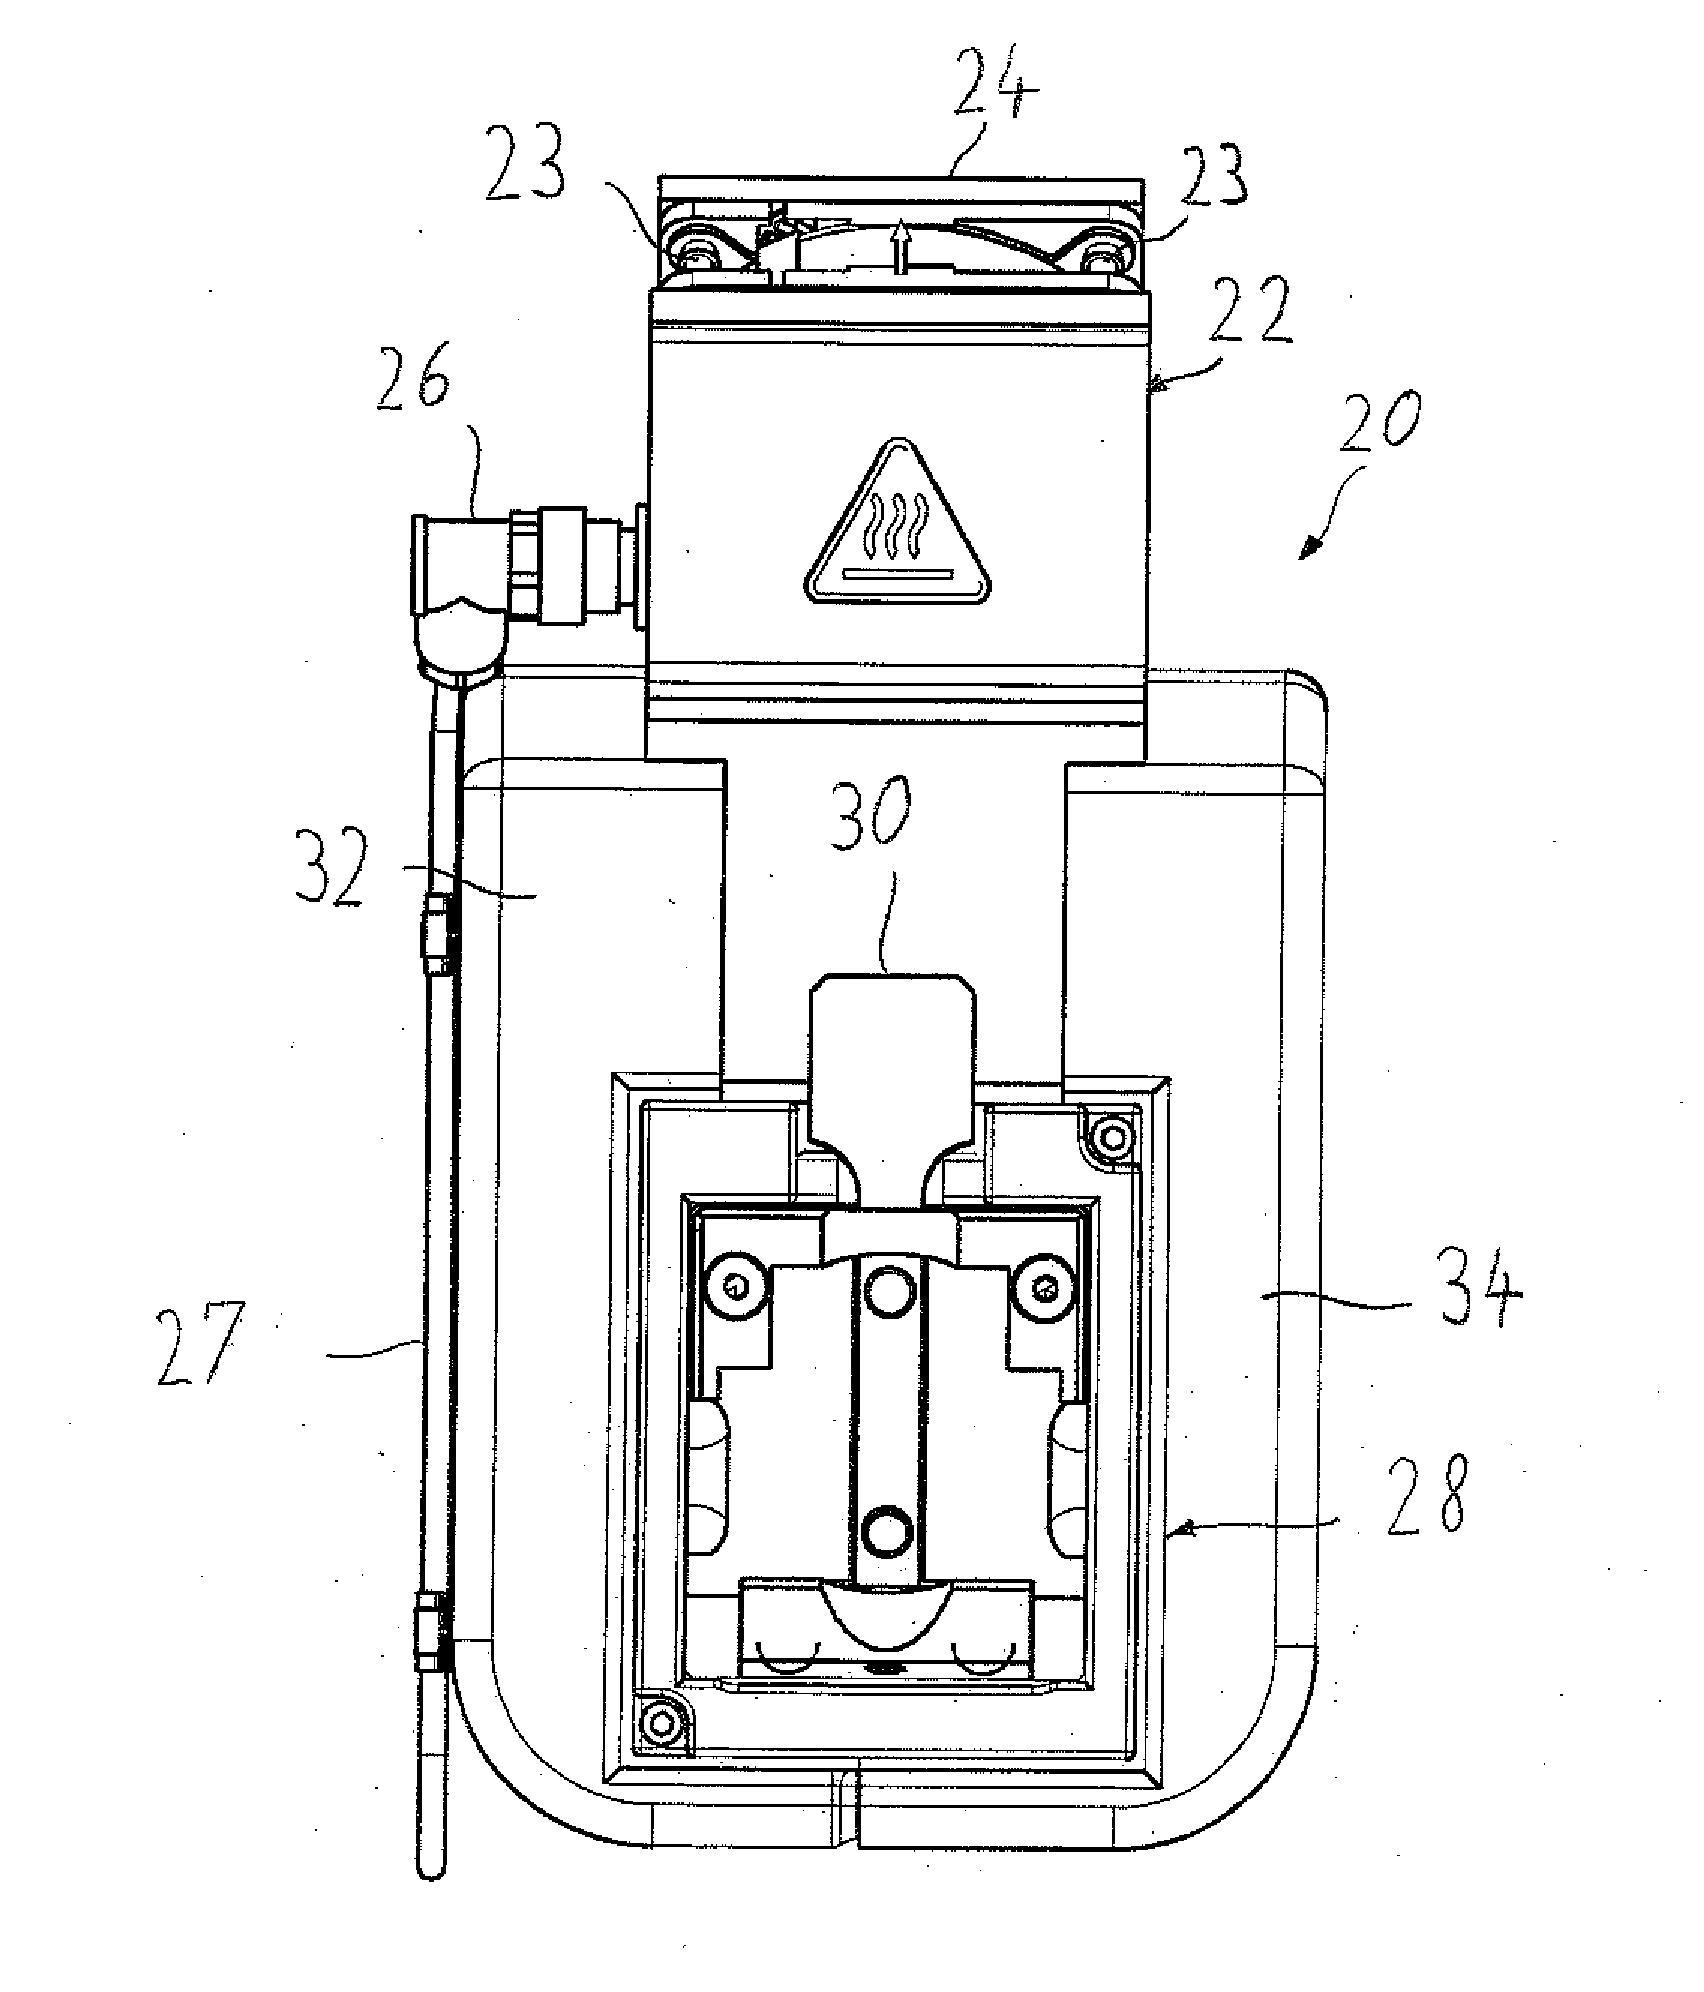 Microtome Cassette Clamp Having An Air Channel For Dissipating The Heat Of A Cooling Element, And Microtome